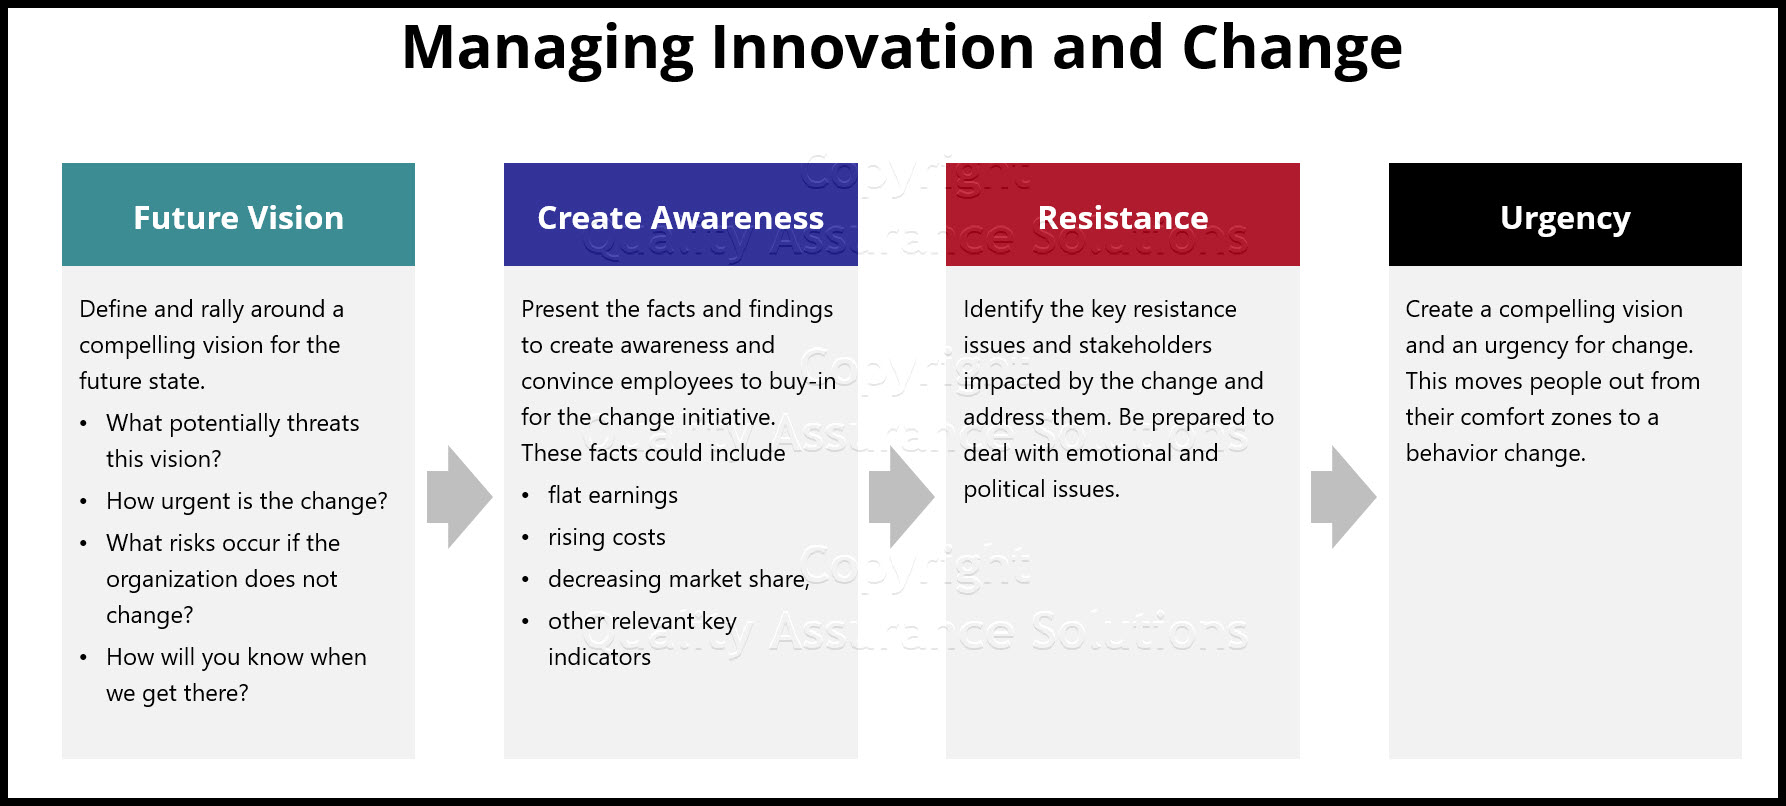 Managing innovation and change can be a challenge to your company. Click here to learn a change strategy within your company